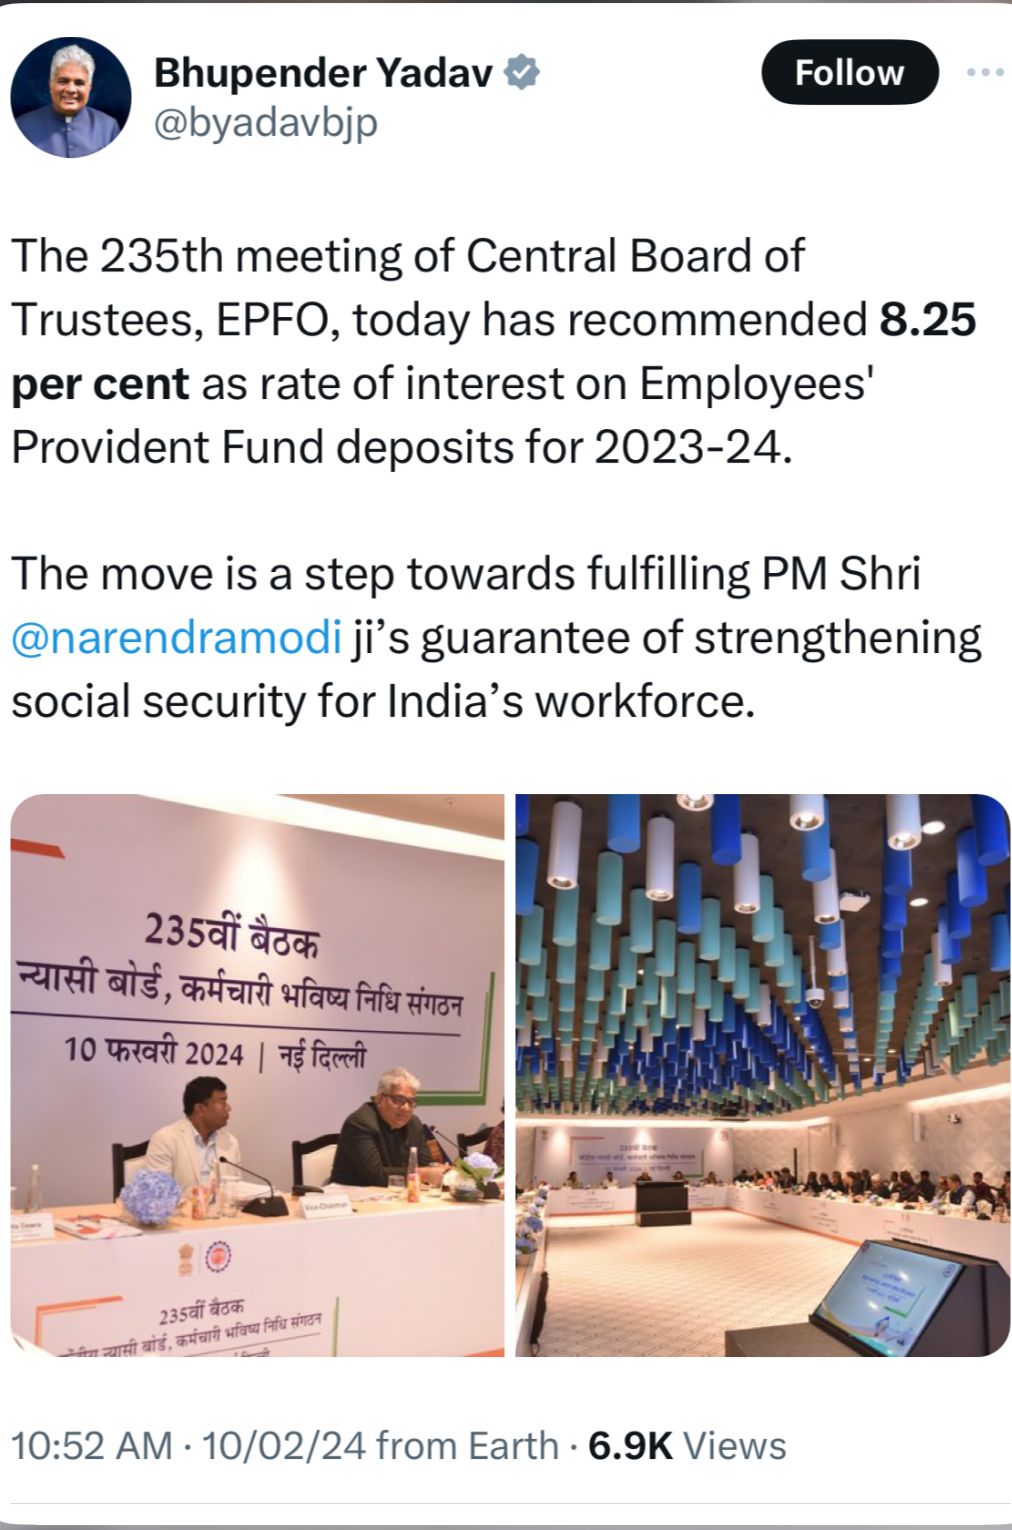 Labour Minister Bhupendra Yadav, who also serves as Chairman of CBT, on his social media, X, account shared "This initiative aligns with Prime Minister Shri @narendramodi ji’s commitment to bolstering social security for India’s workforce." 